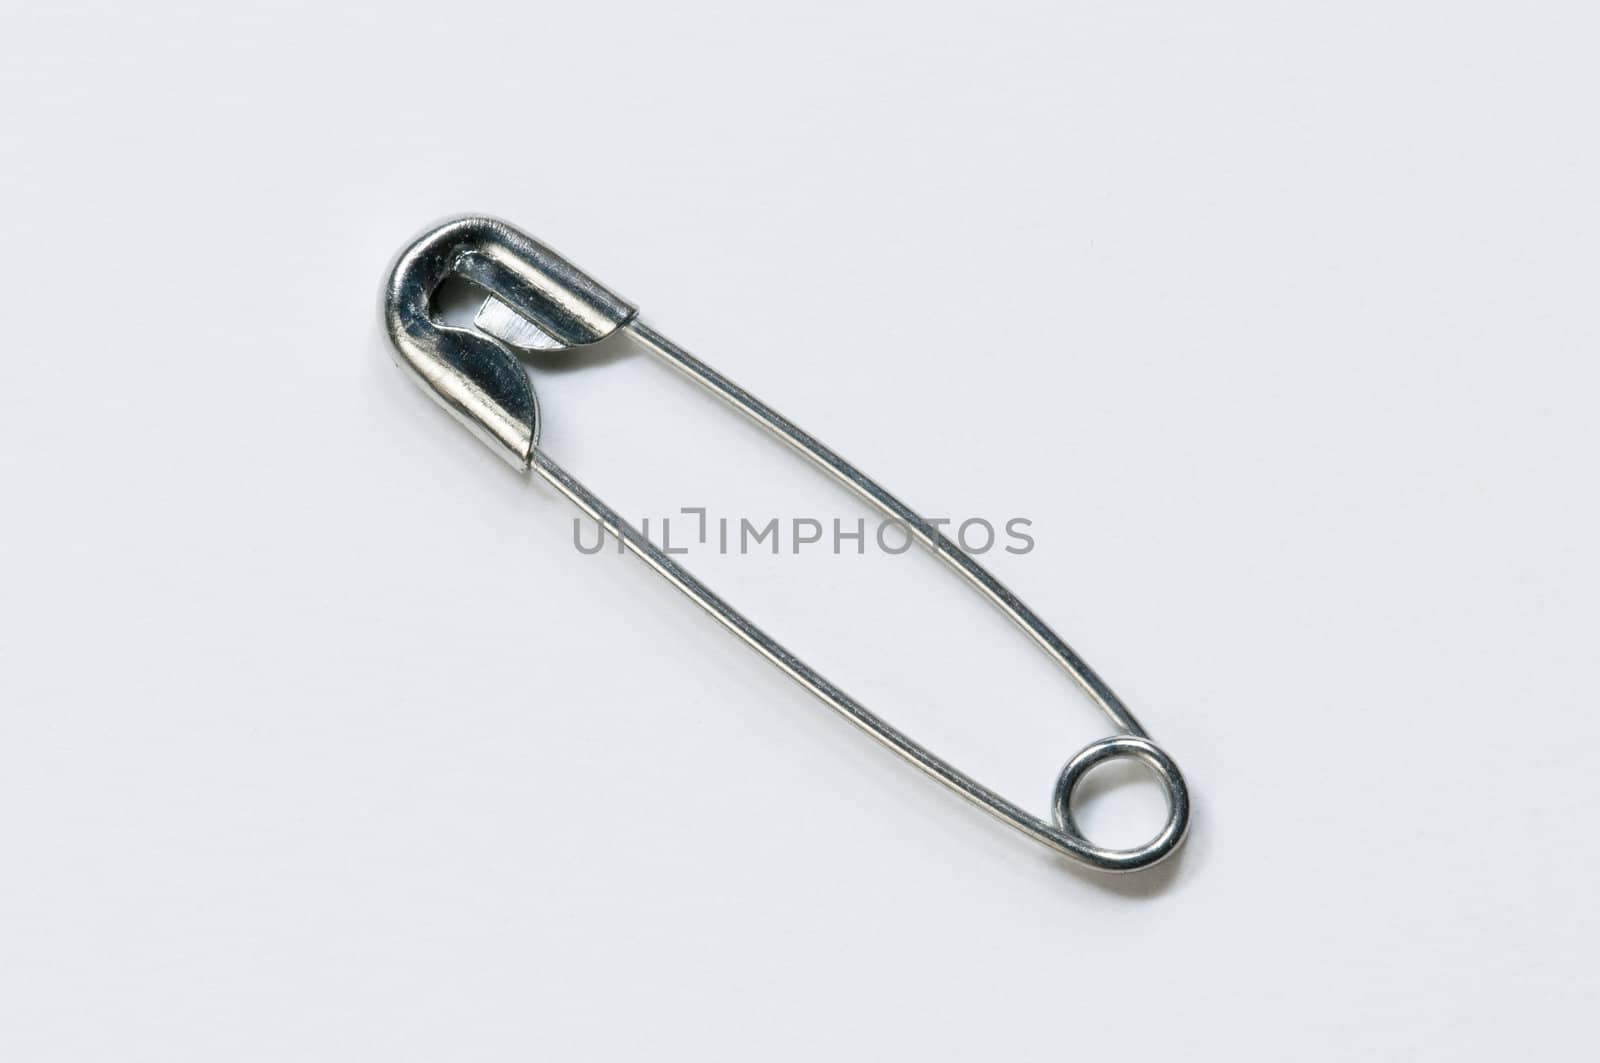 Isolated, closed safety pin in white background